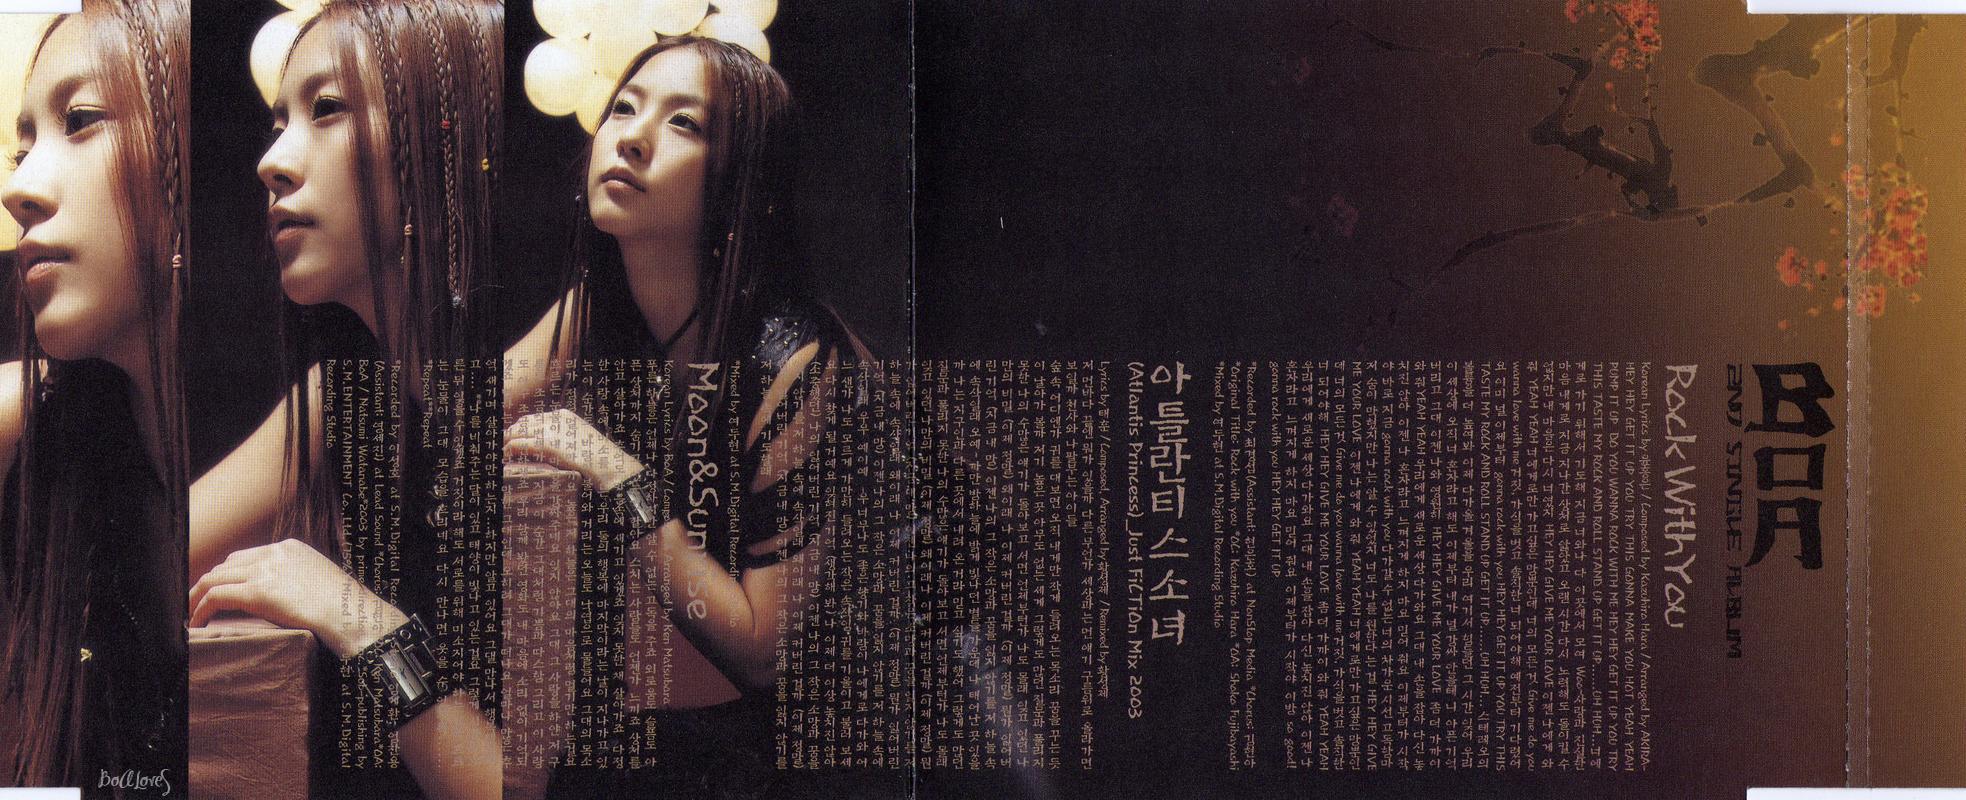 BoA - Rock With You Japanese Scans